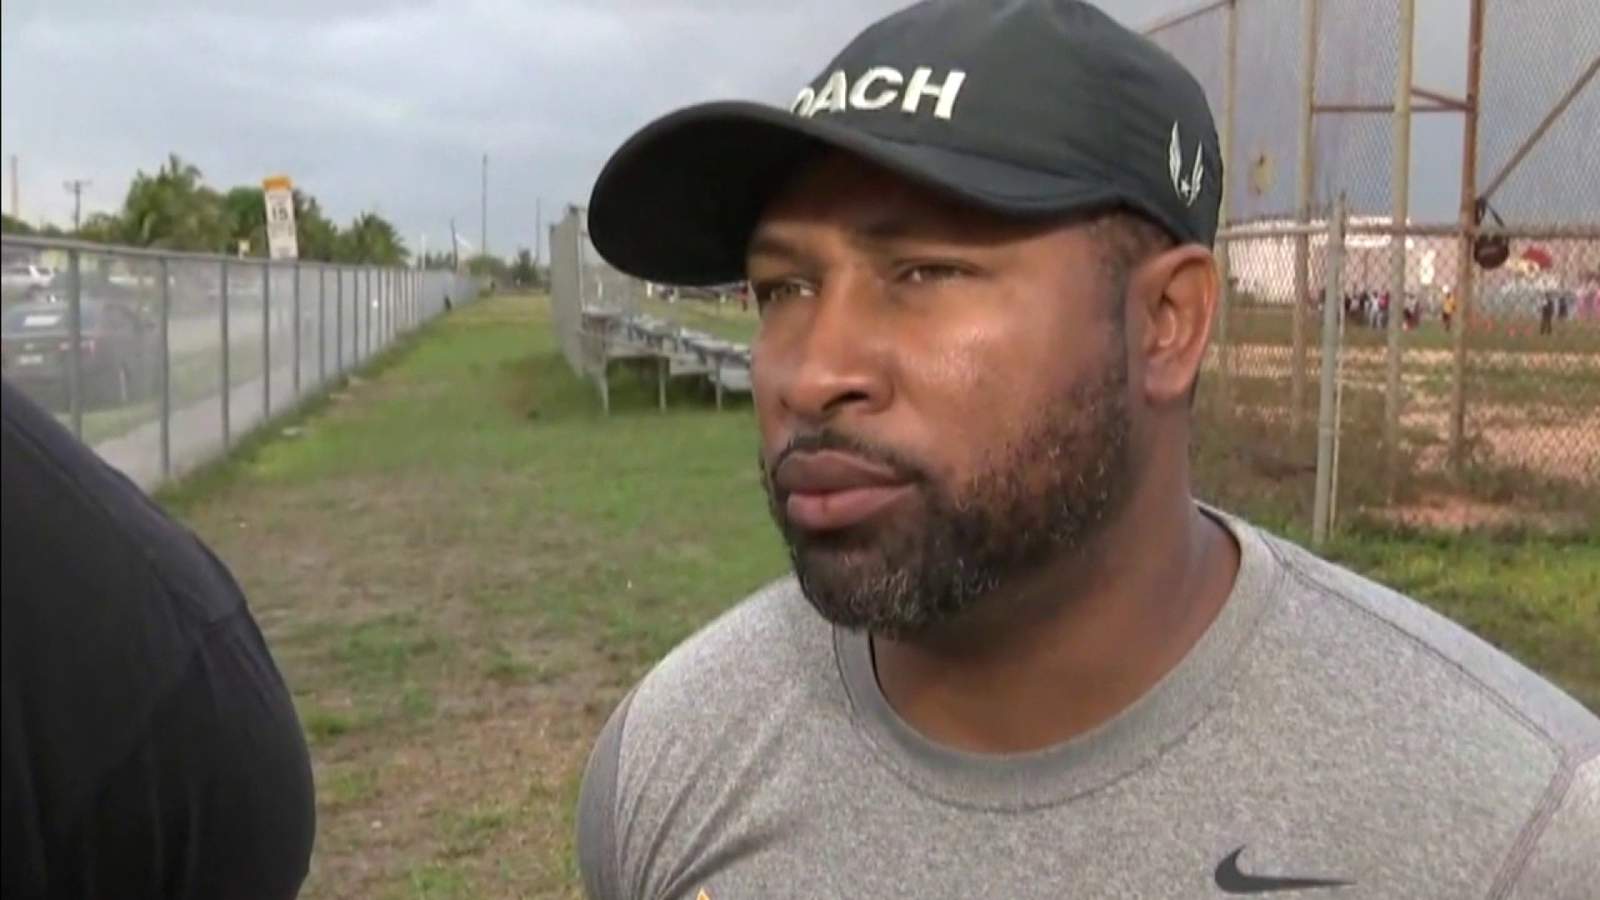 2 more young women accuse youth track coach of sexually abusing them